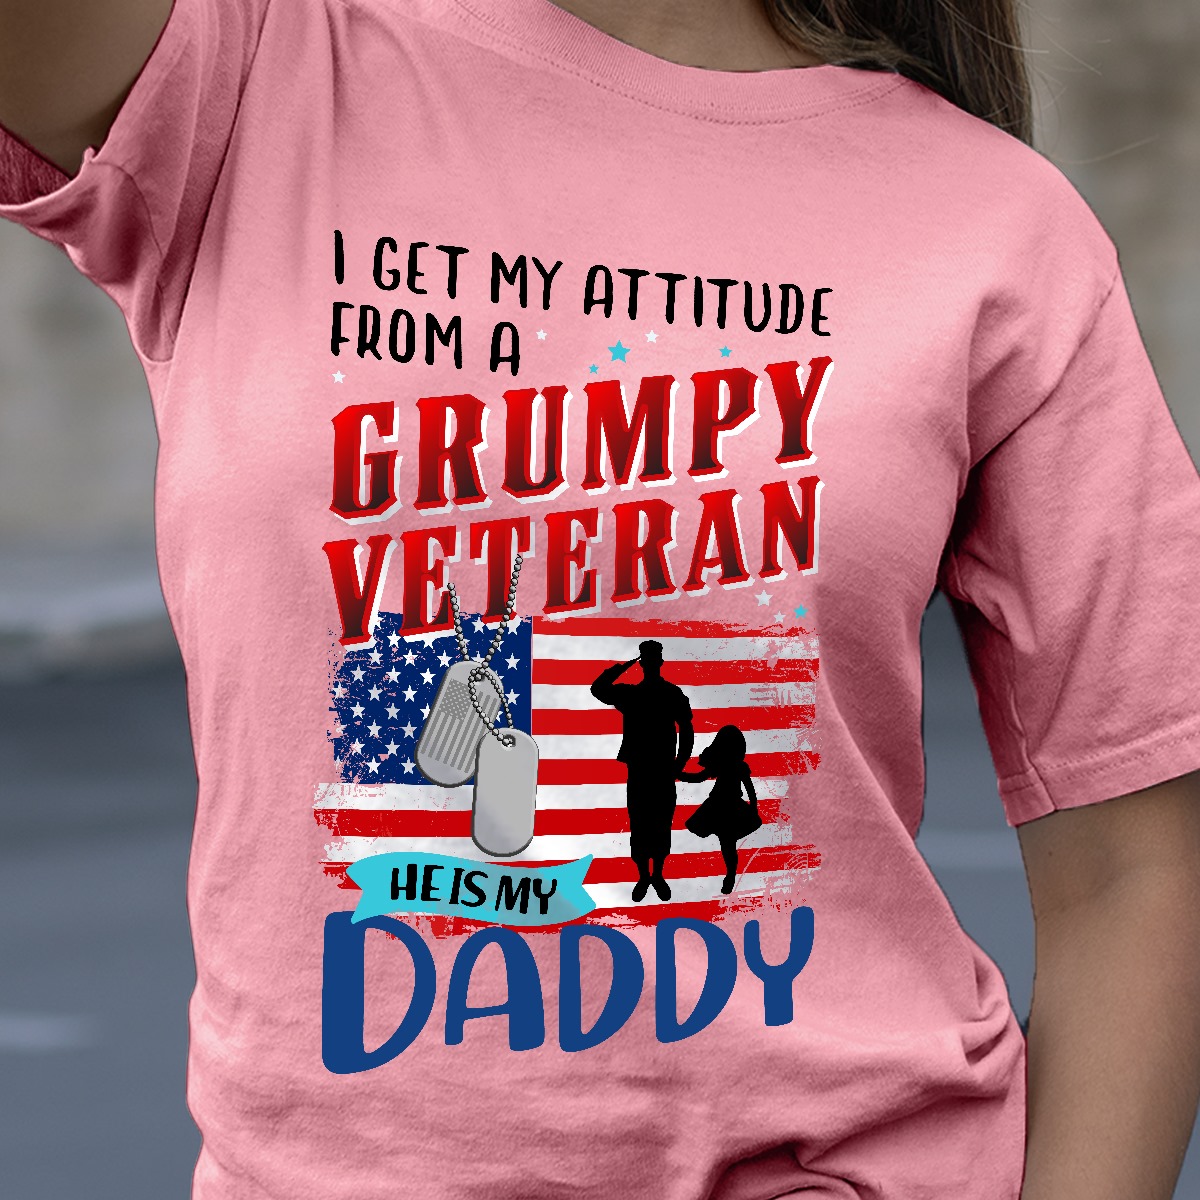 I get my attitude from a grumpy veteran he is my daddy - America flag